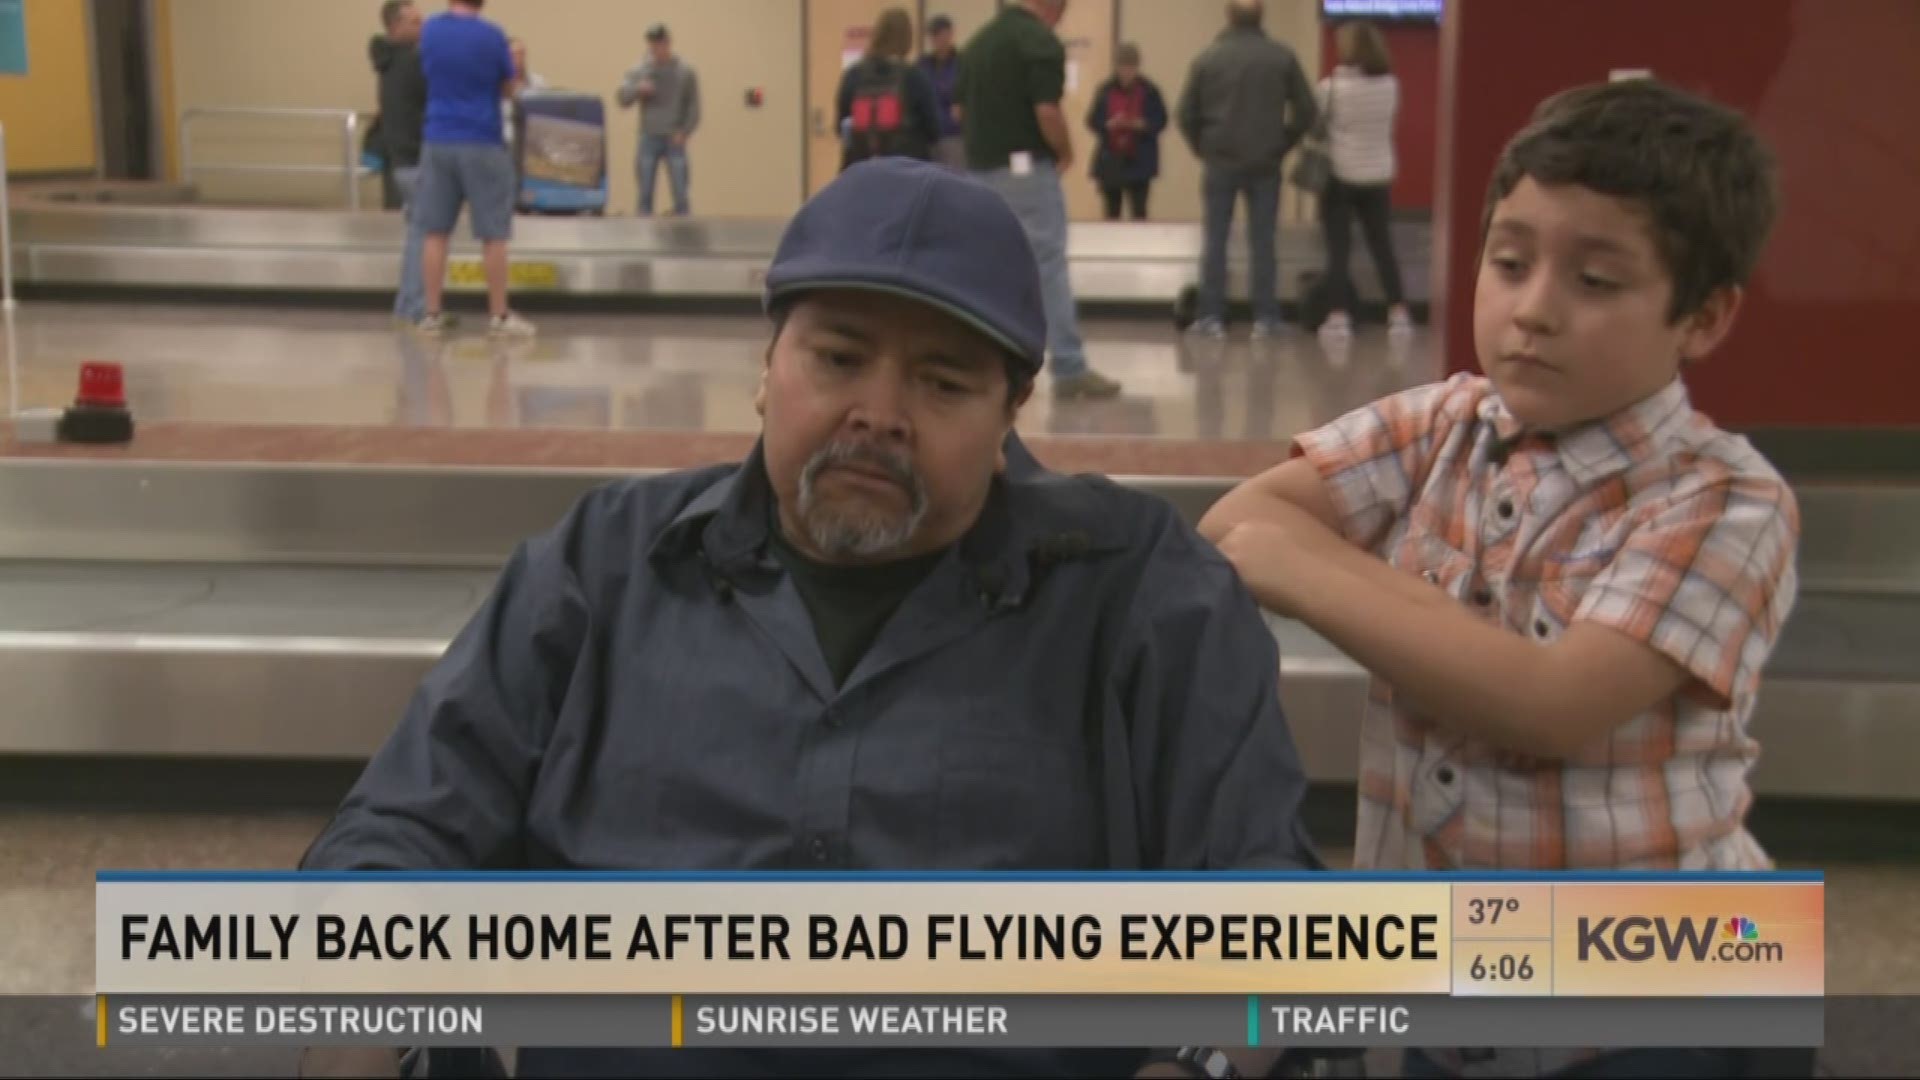 Family back home after bad flying experience